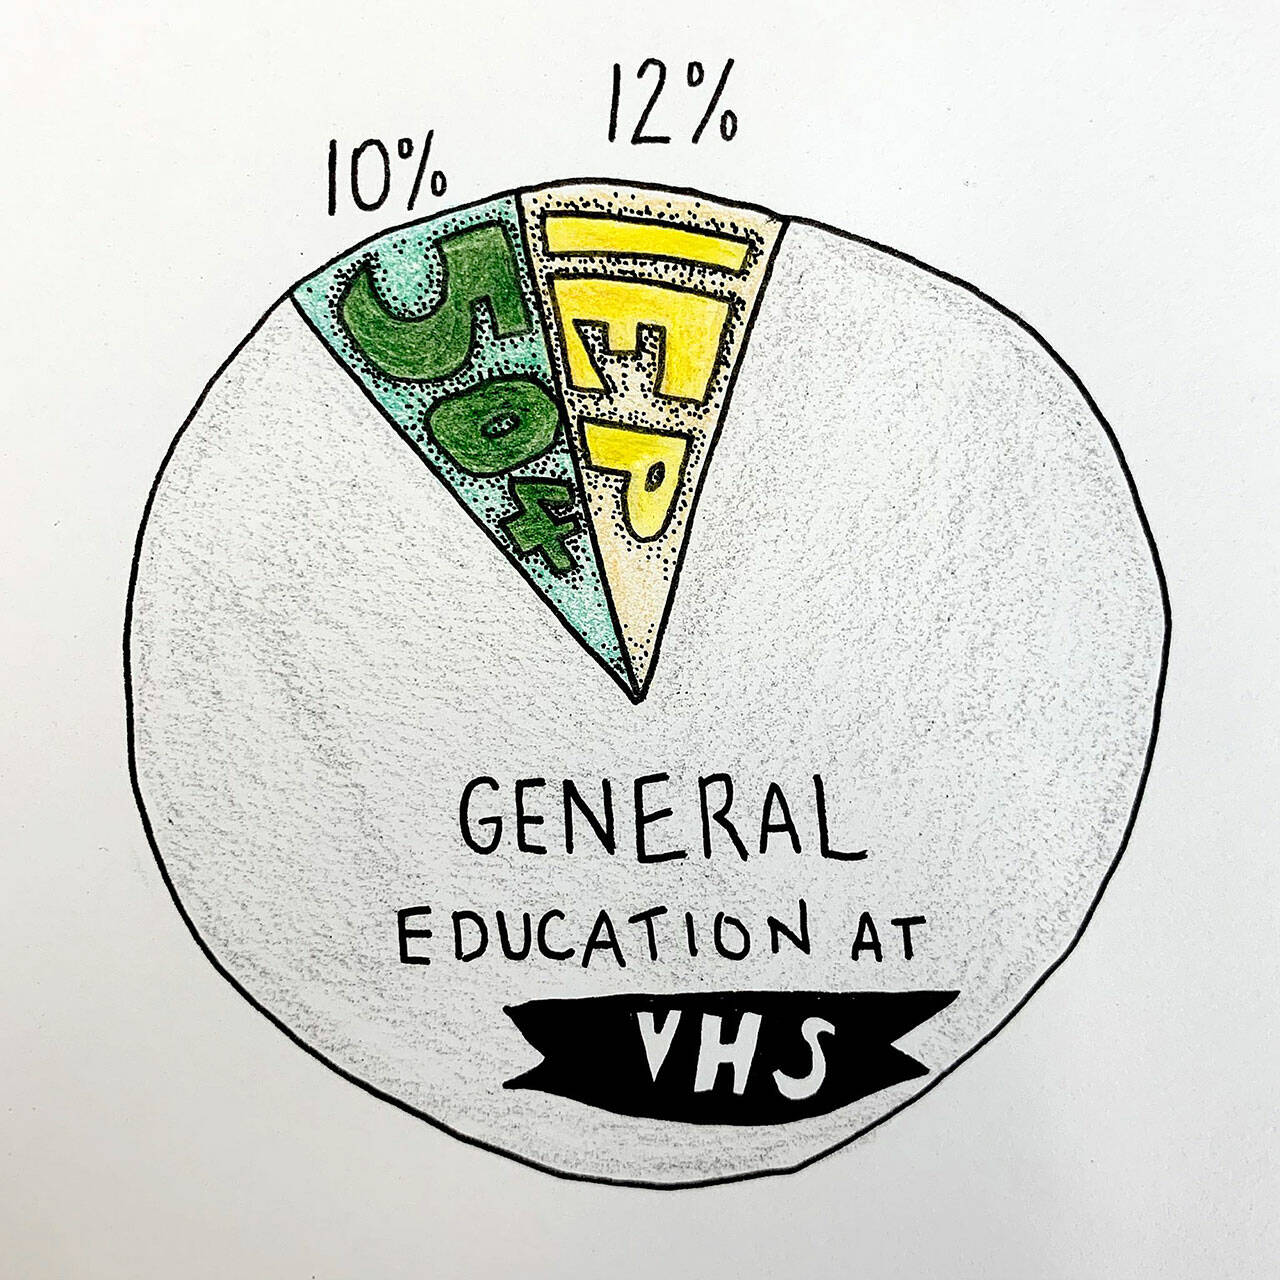 (Savannah Butcher Graphic) SUPPORT: Students served by 504 plans and IEPs make up 22% of the student body at VHS. The other 78% do not have written accommodations.